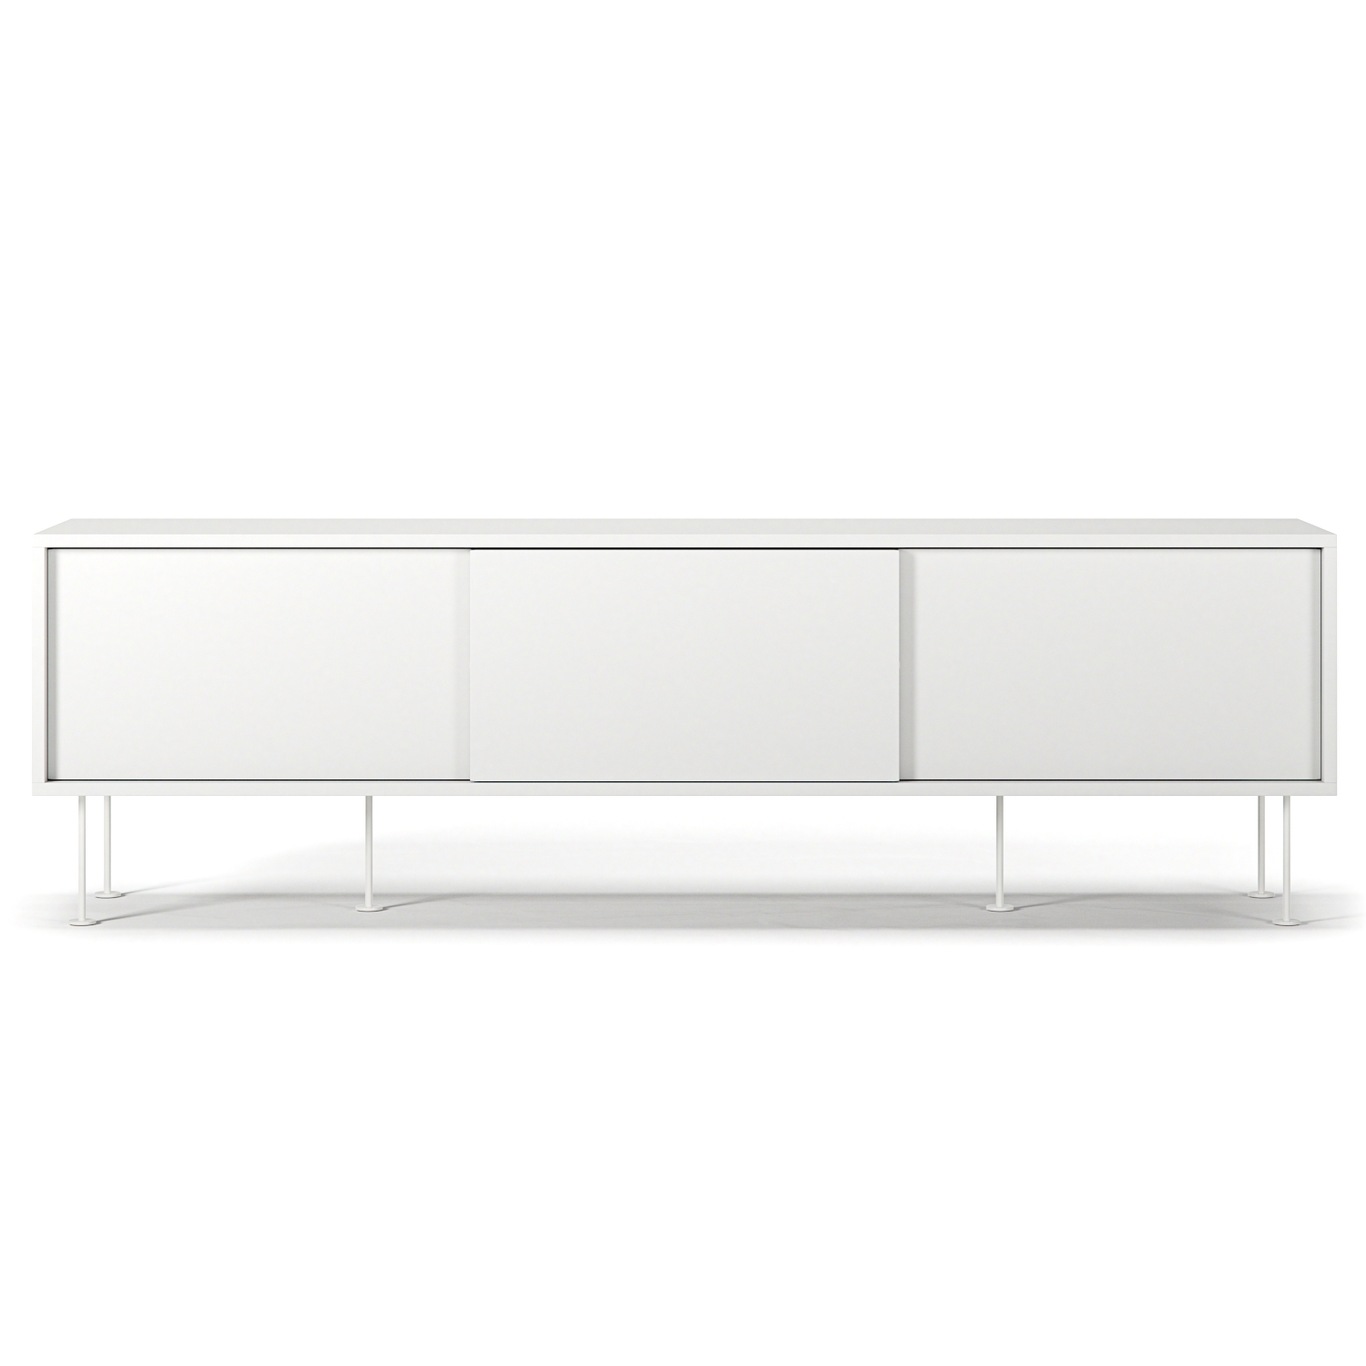 Vogue Media Bench With Legs 180 cm, White